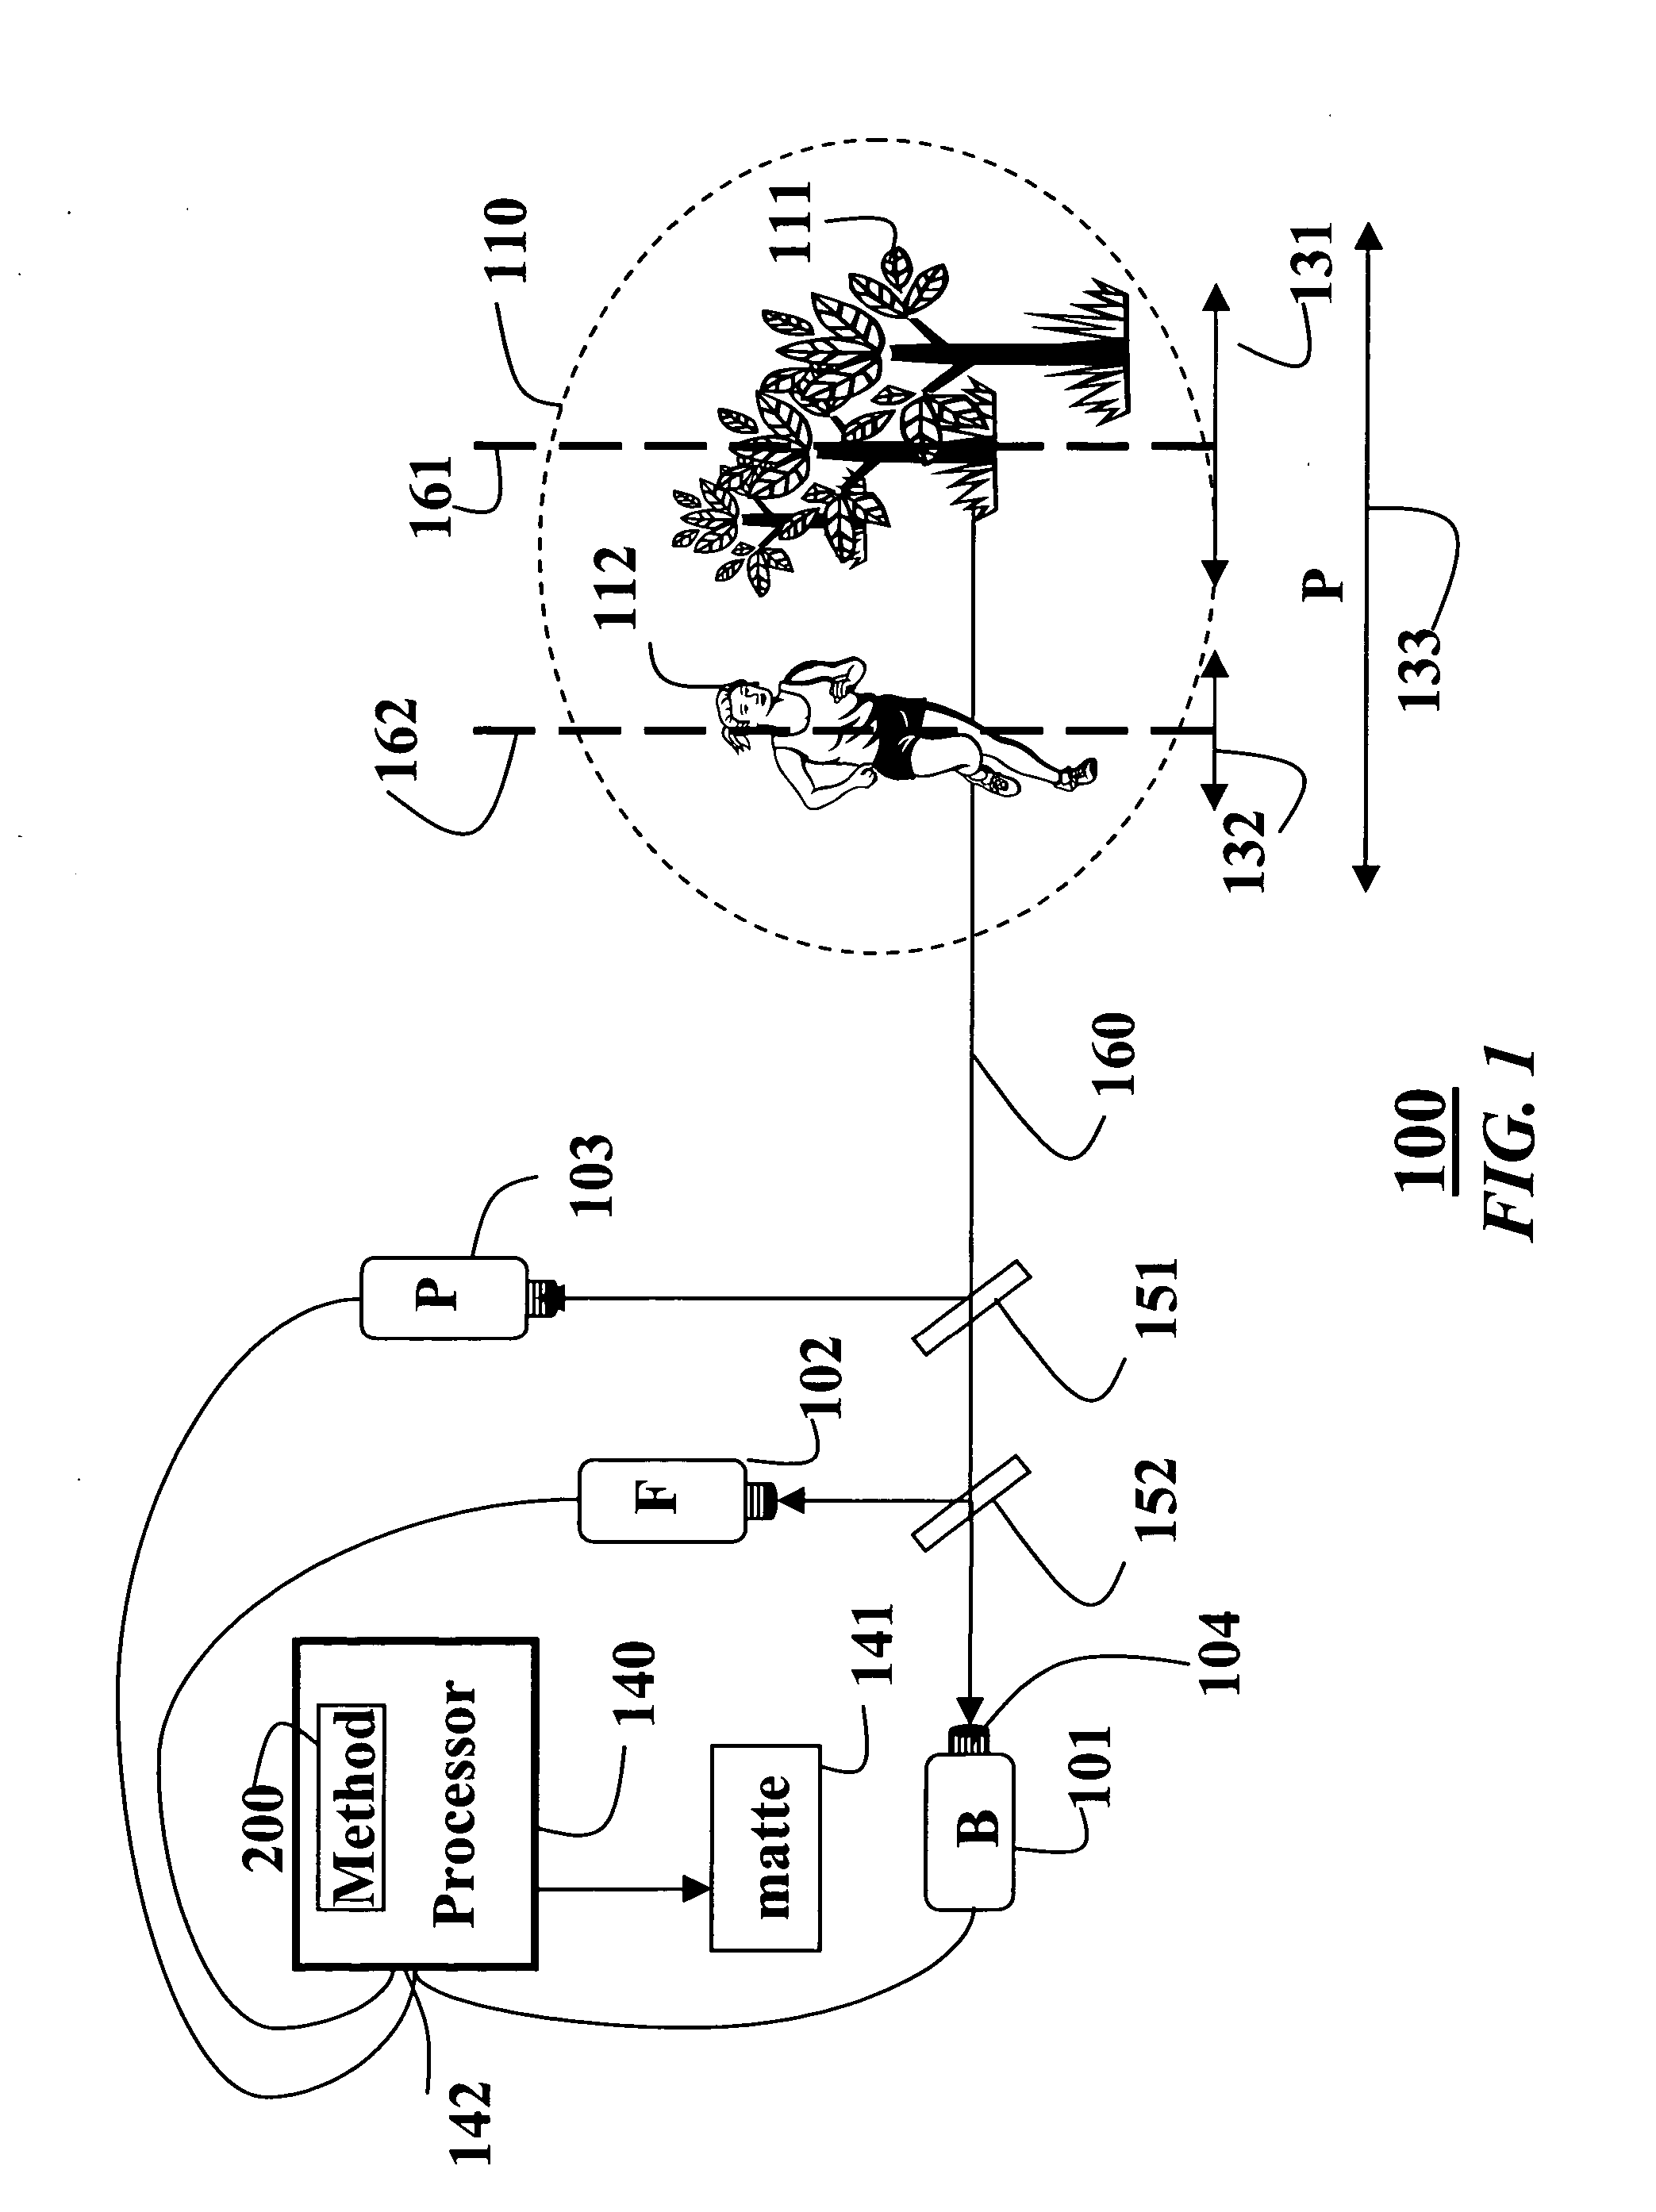 System and method for image matting